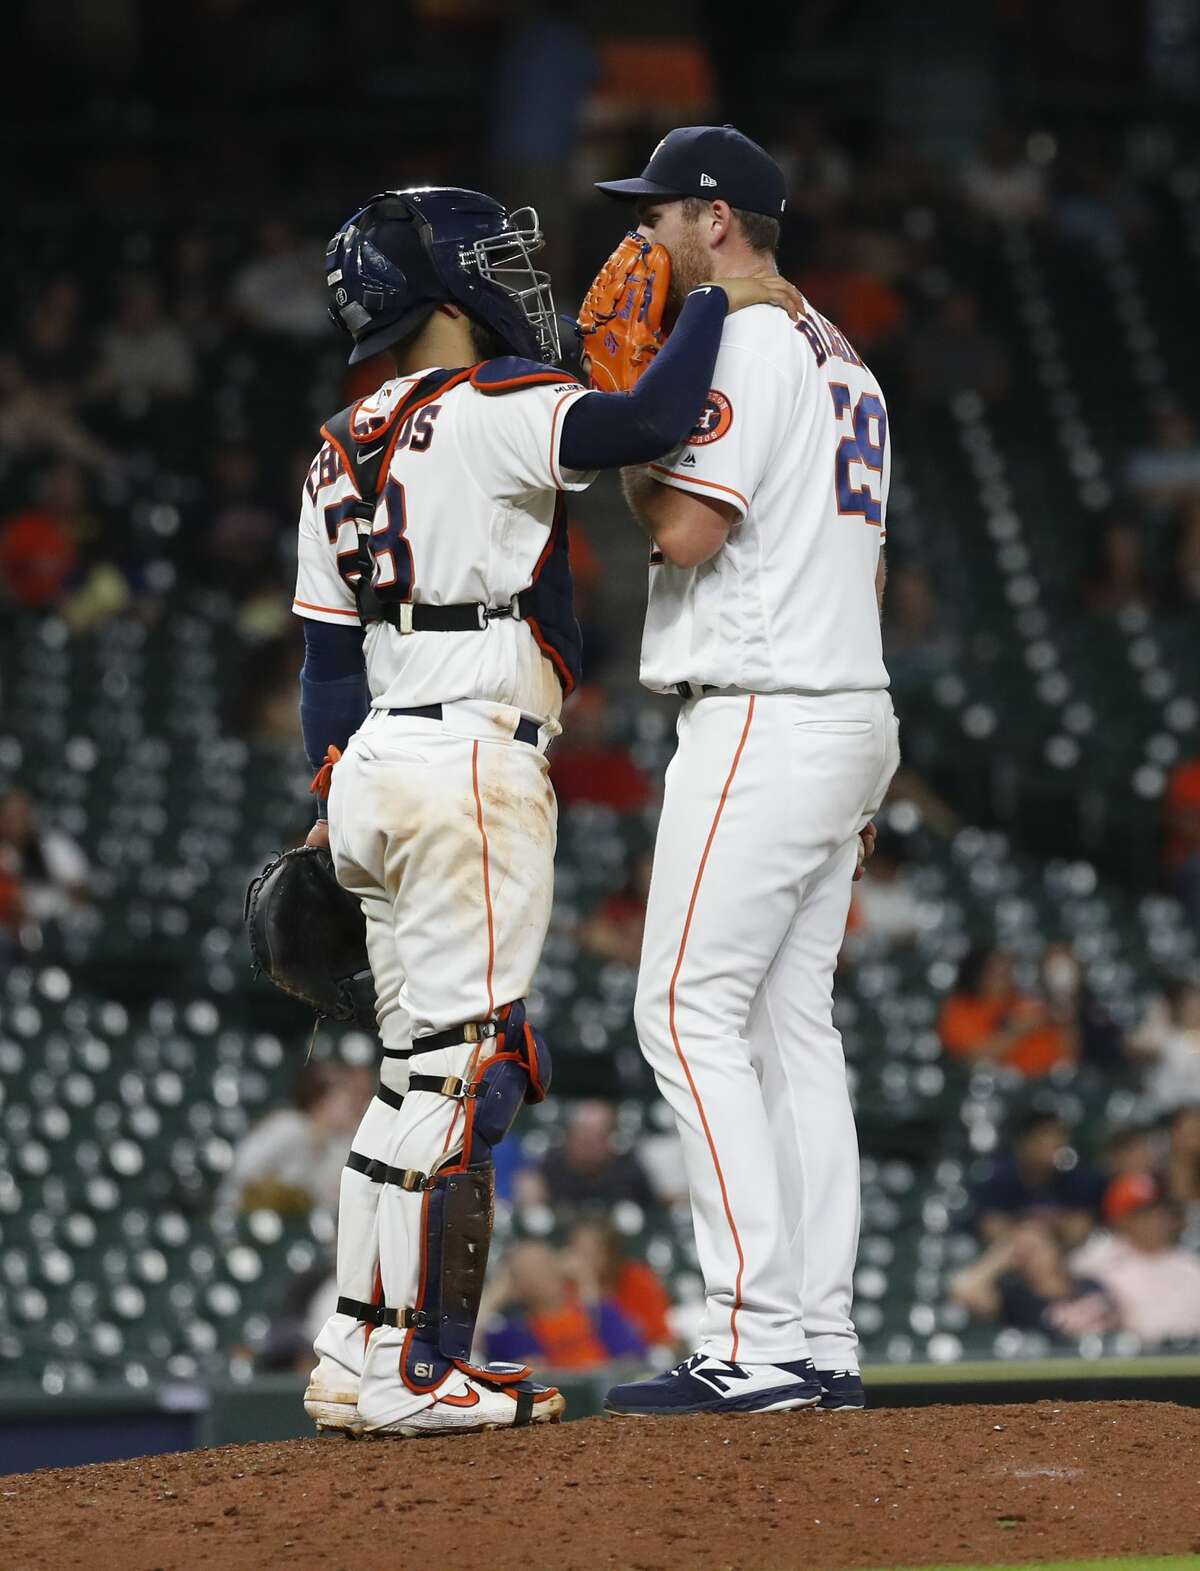 Houston Astros catcher Robinson Chirinos (28) chats with relief pitcher Joe Biagini (29) after he gave up a single to Tampa Bay Rays Eric Sogard during the ninth inning of an MLB baseball game at Minute Maid Park, Tuesday, August 27, 2019.